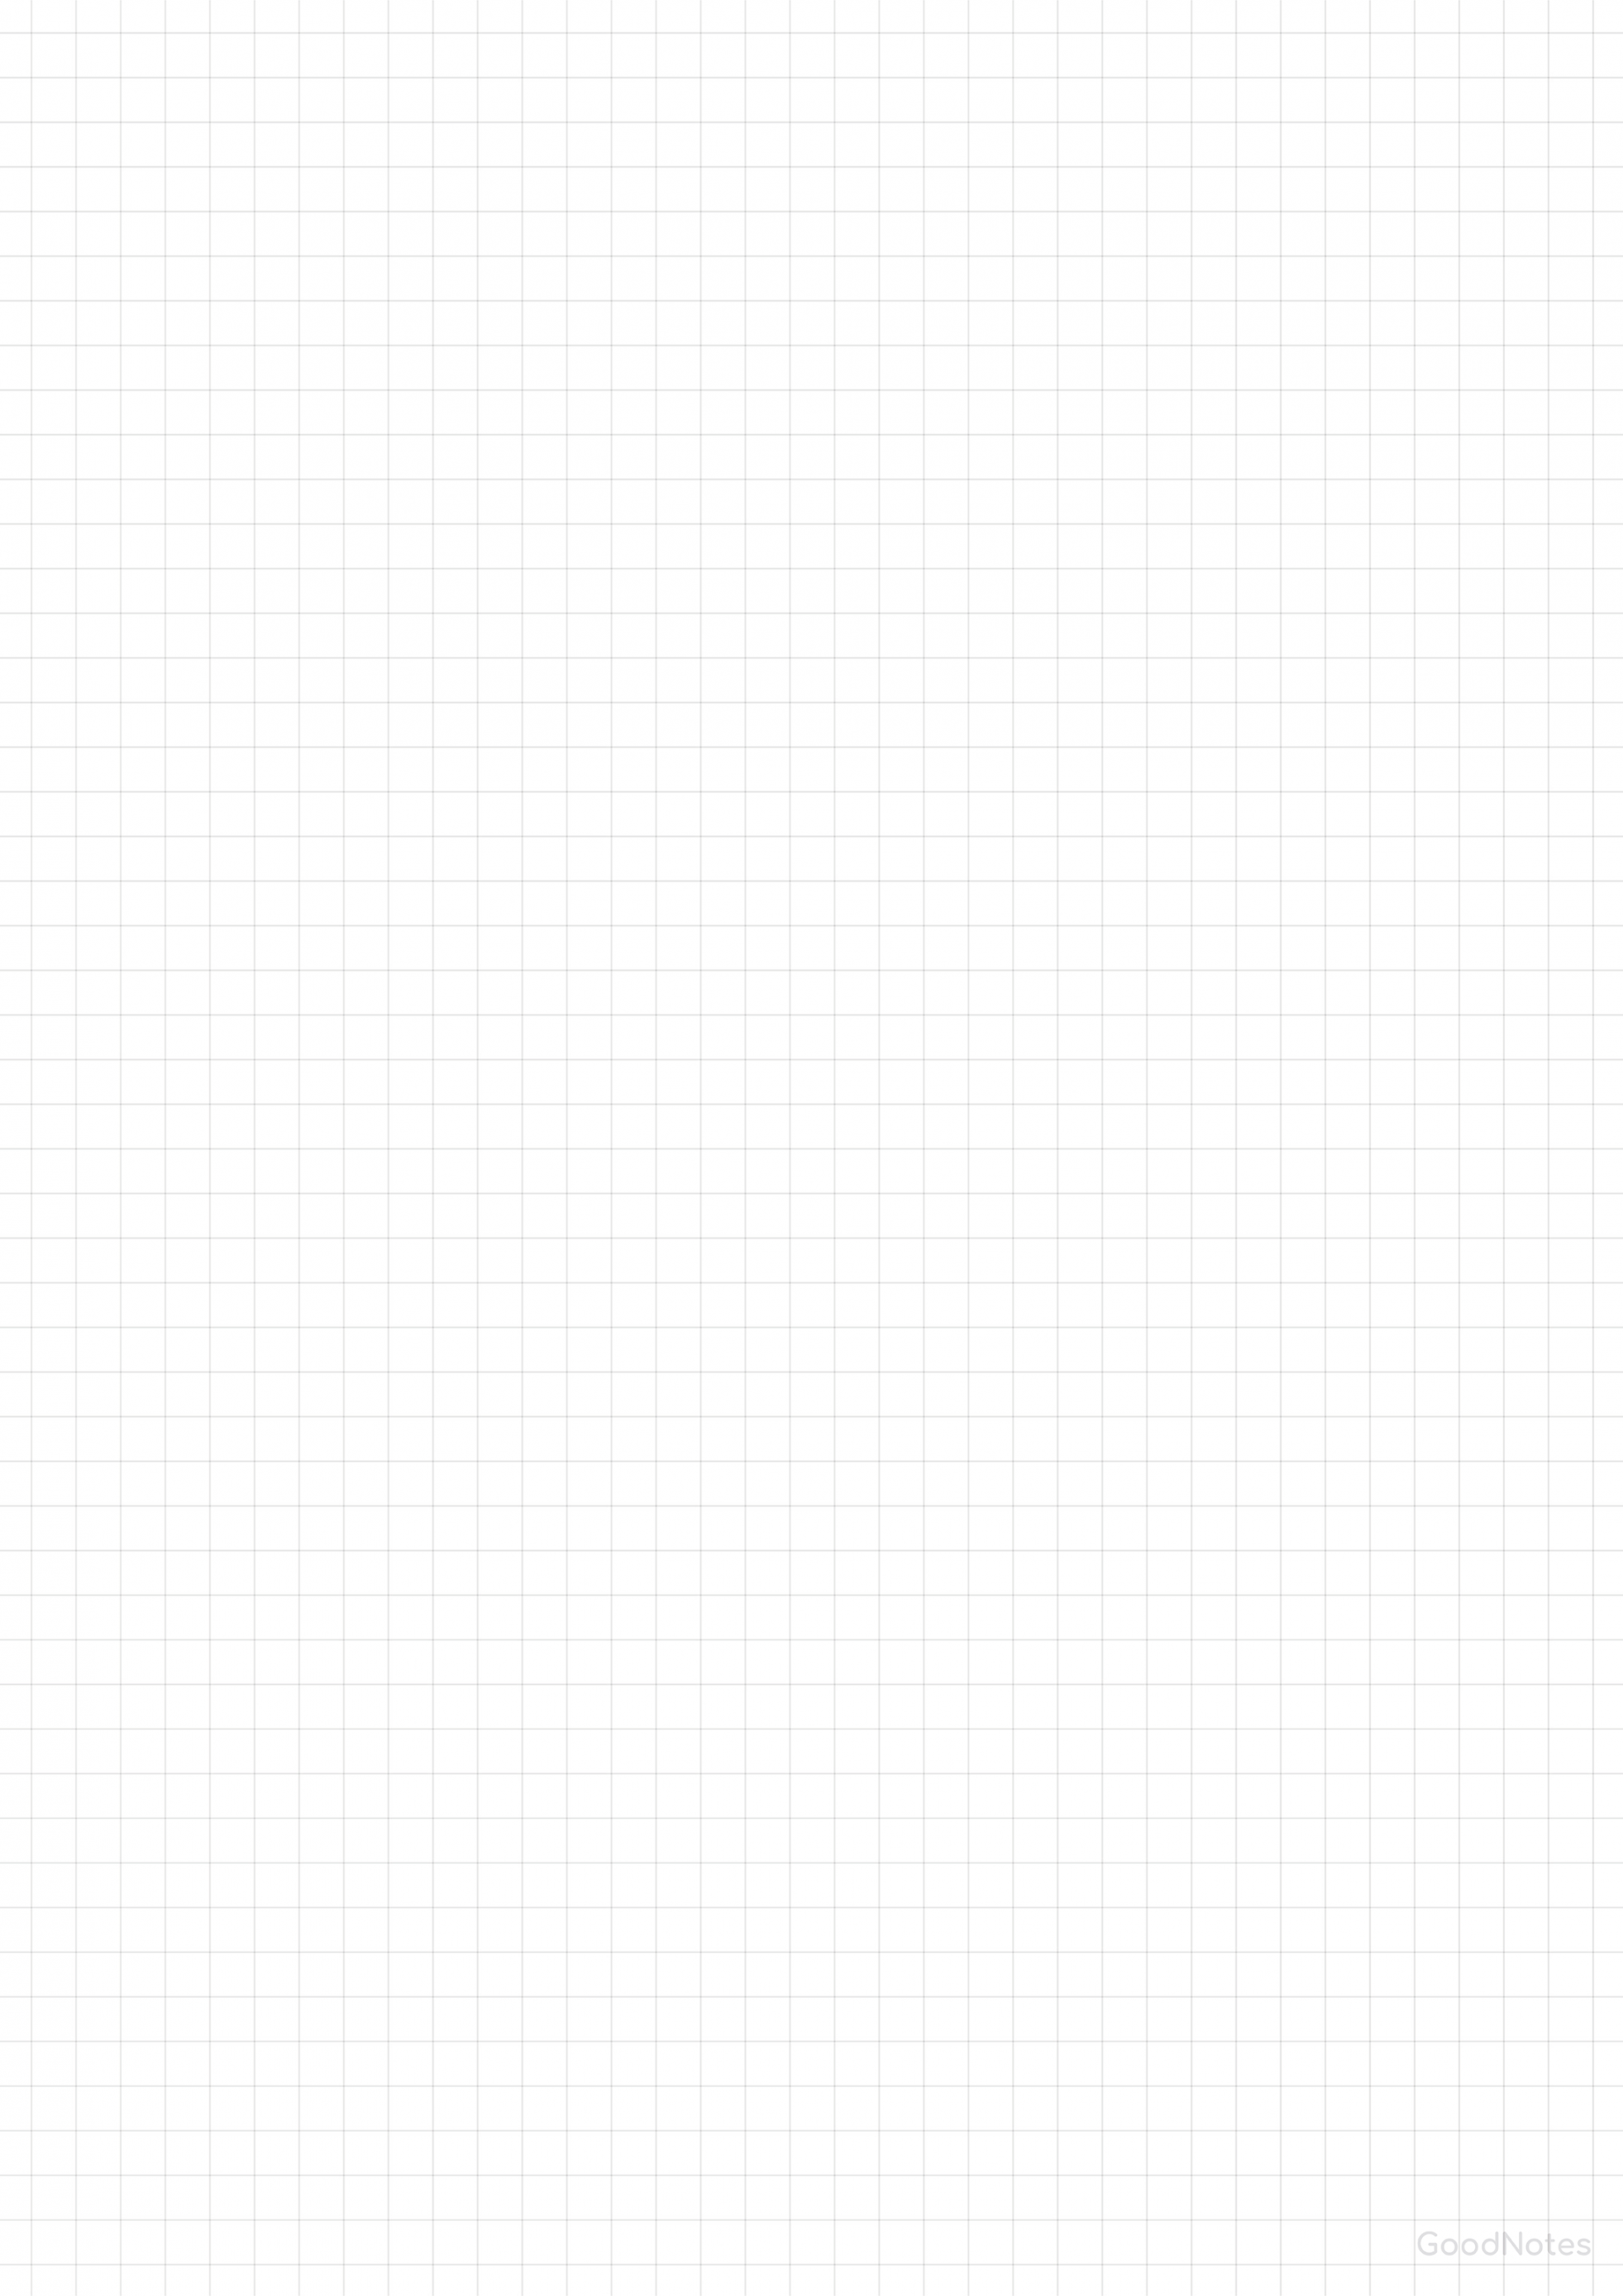 Graph Paper Printable Free - Printable - Free Graph Paper Template  GoodNotes